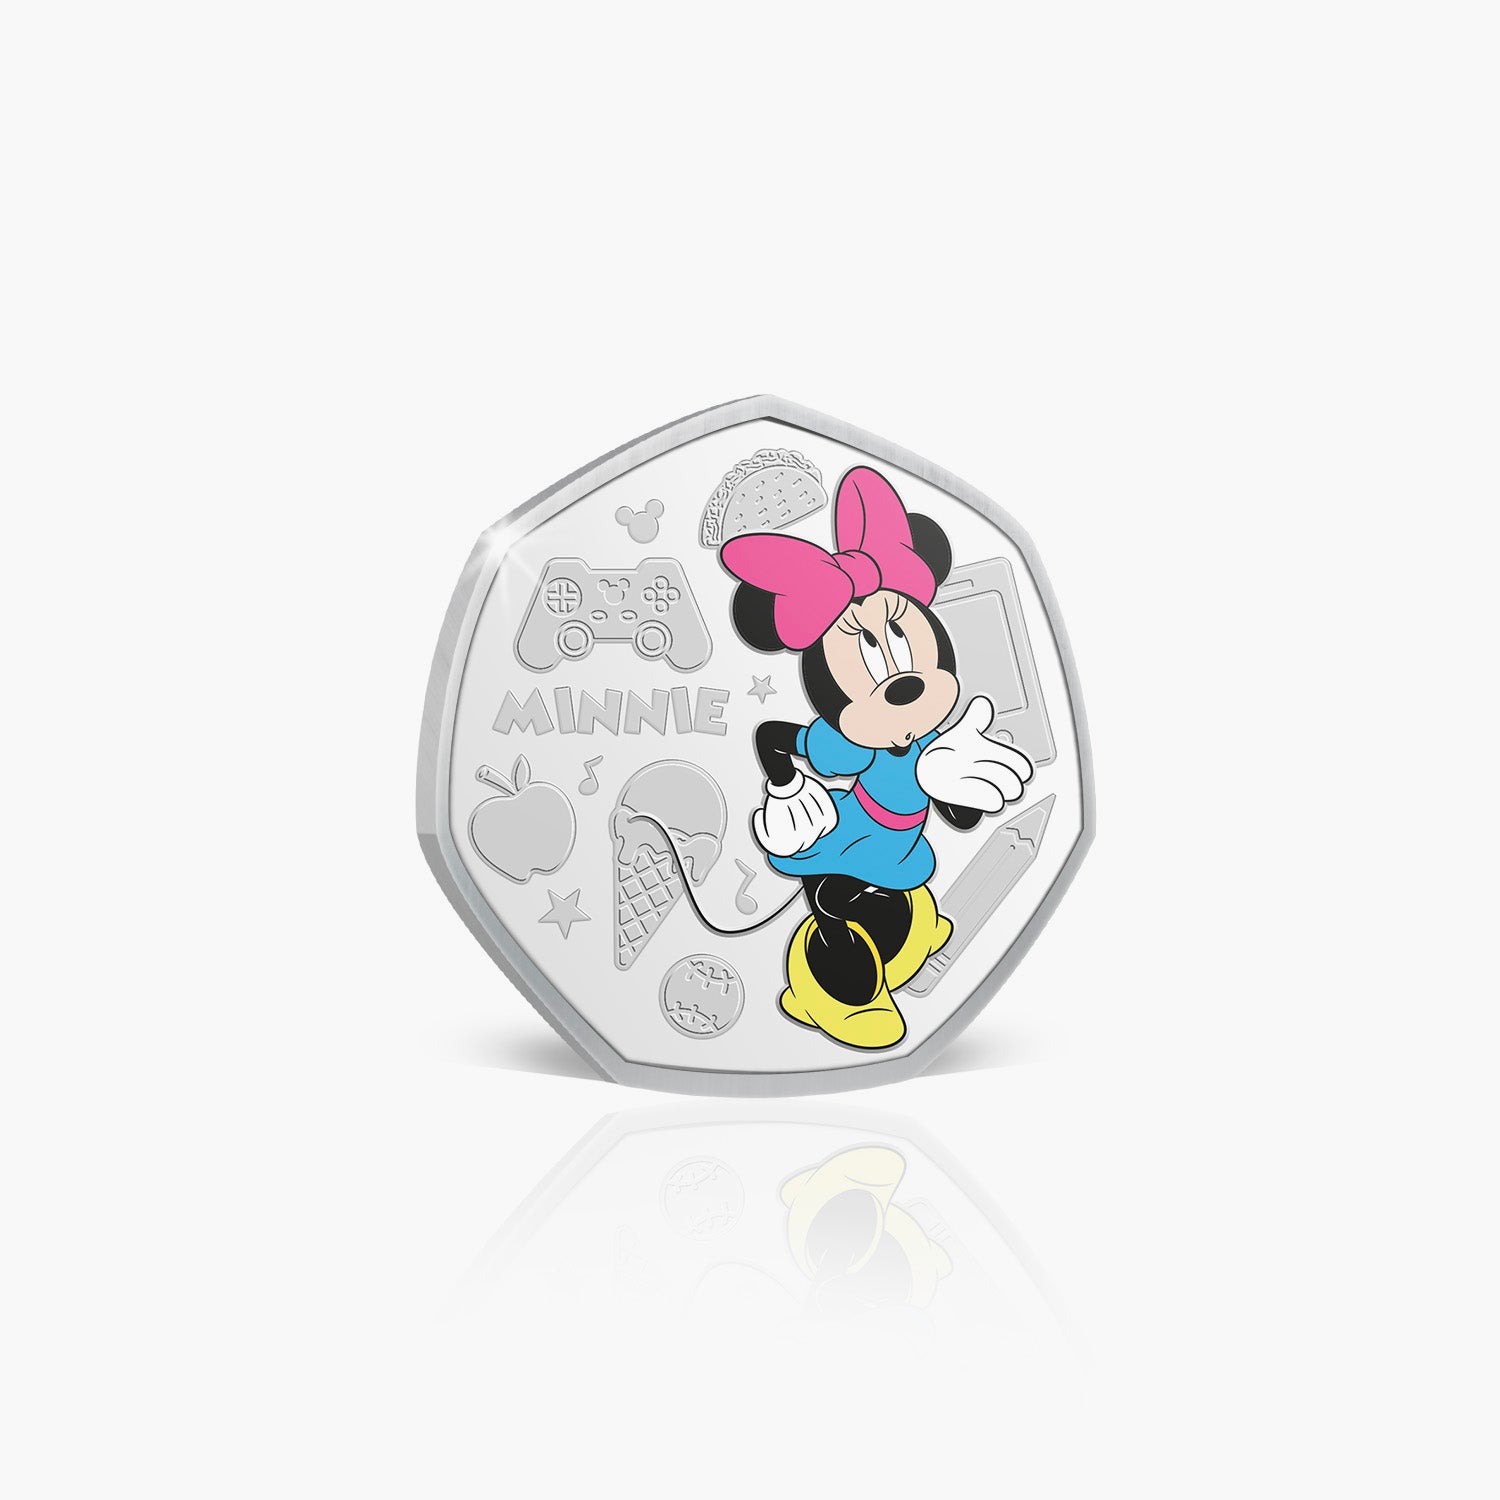 Minnie Mouse Silver-Plated commemorative